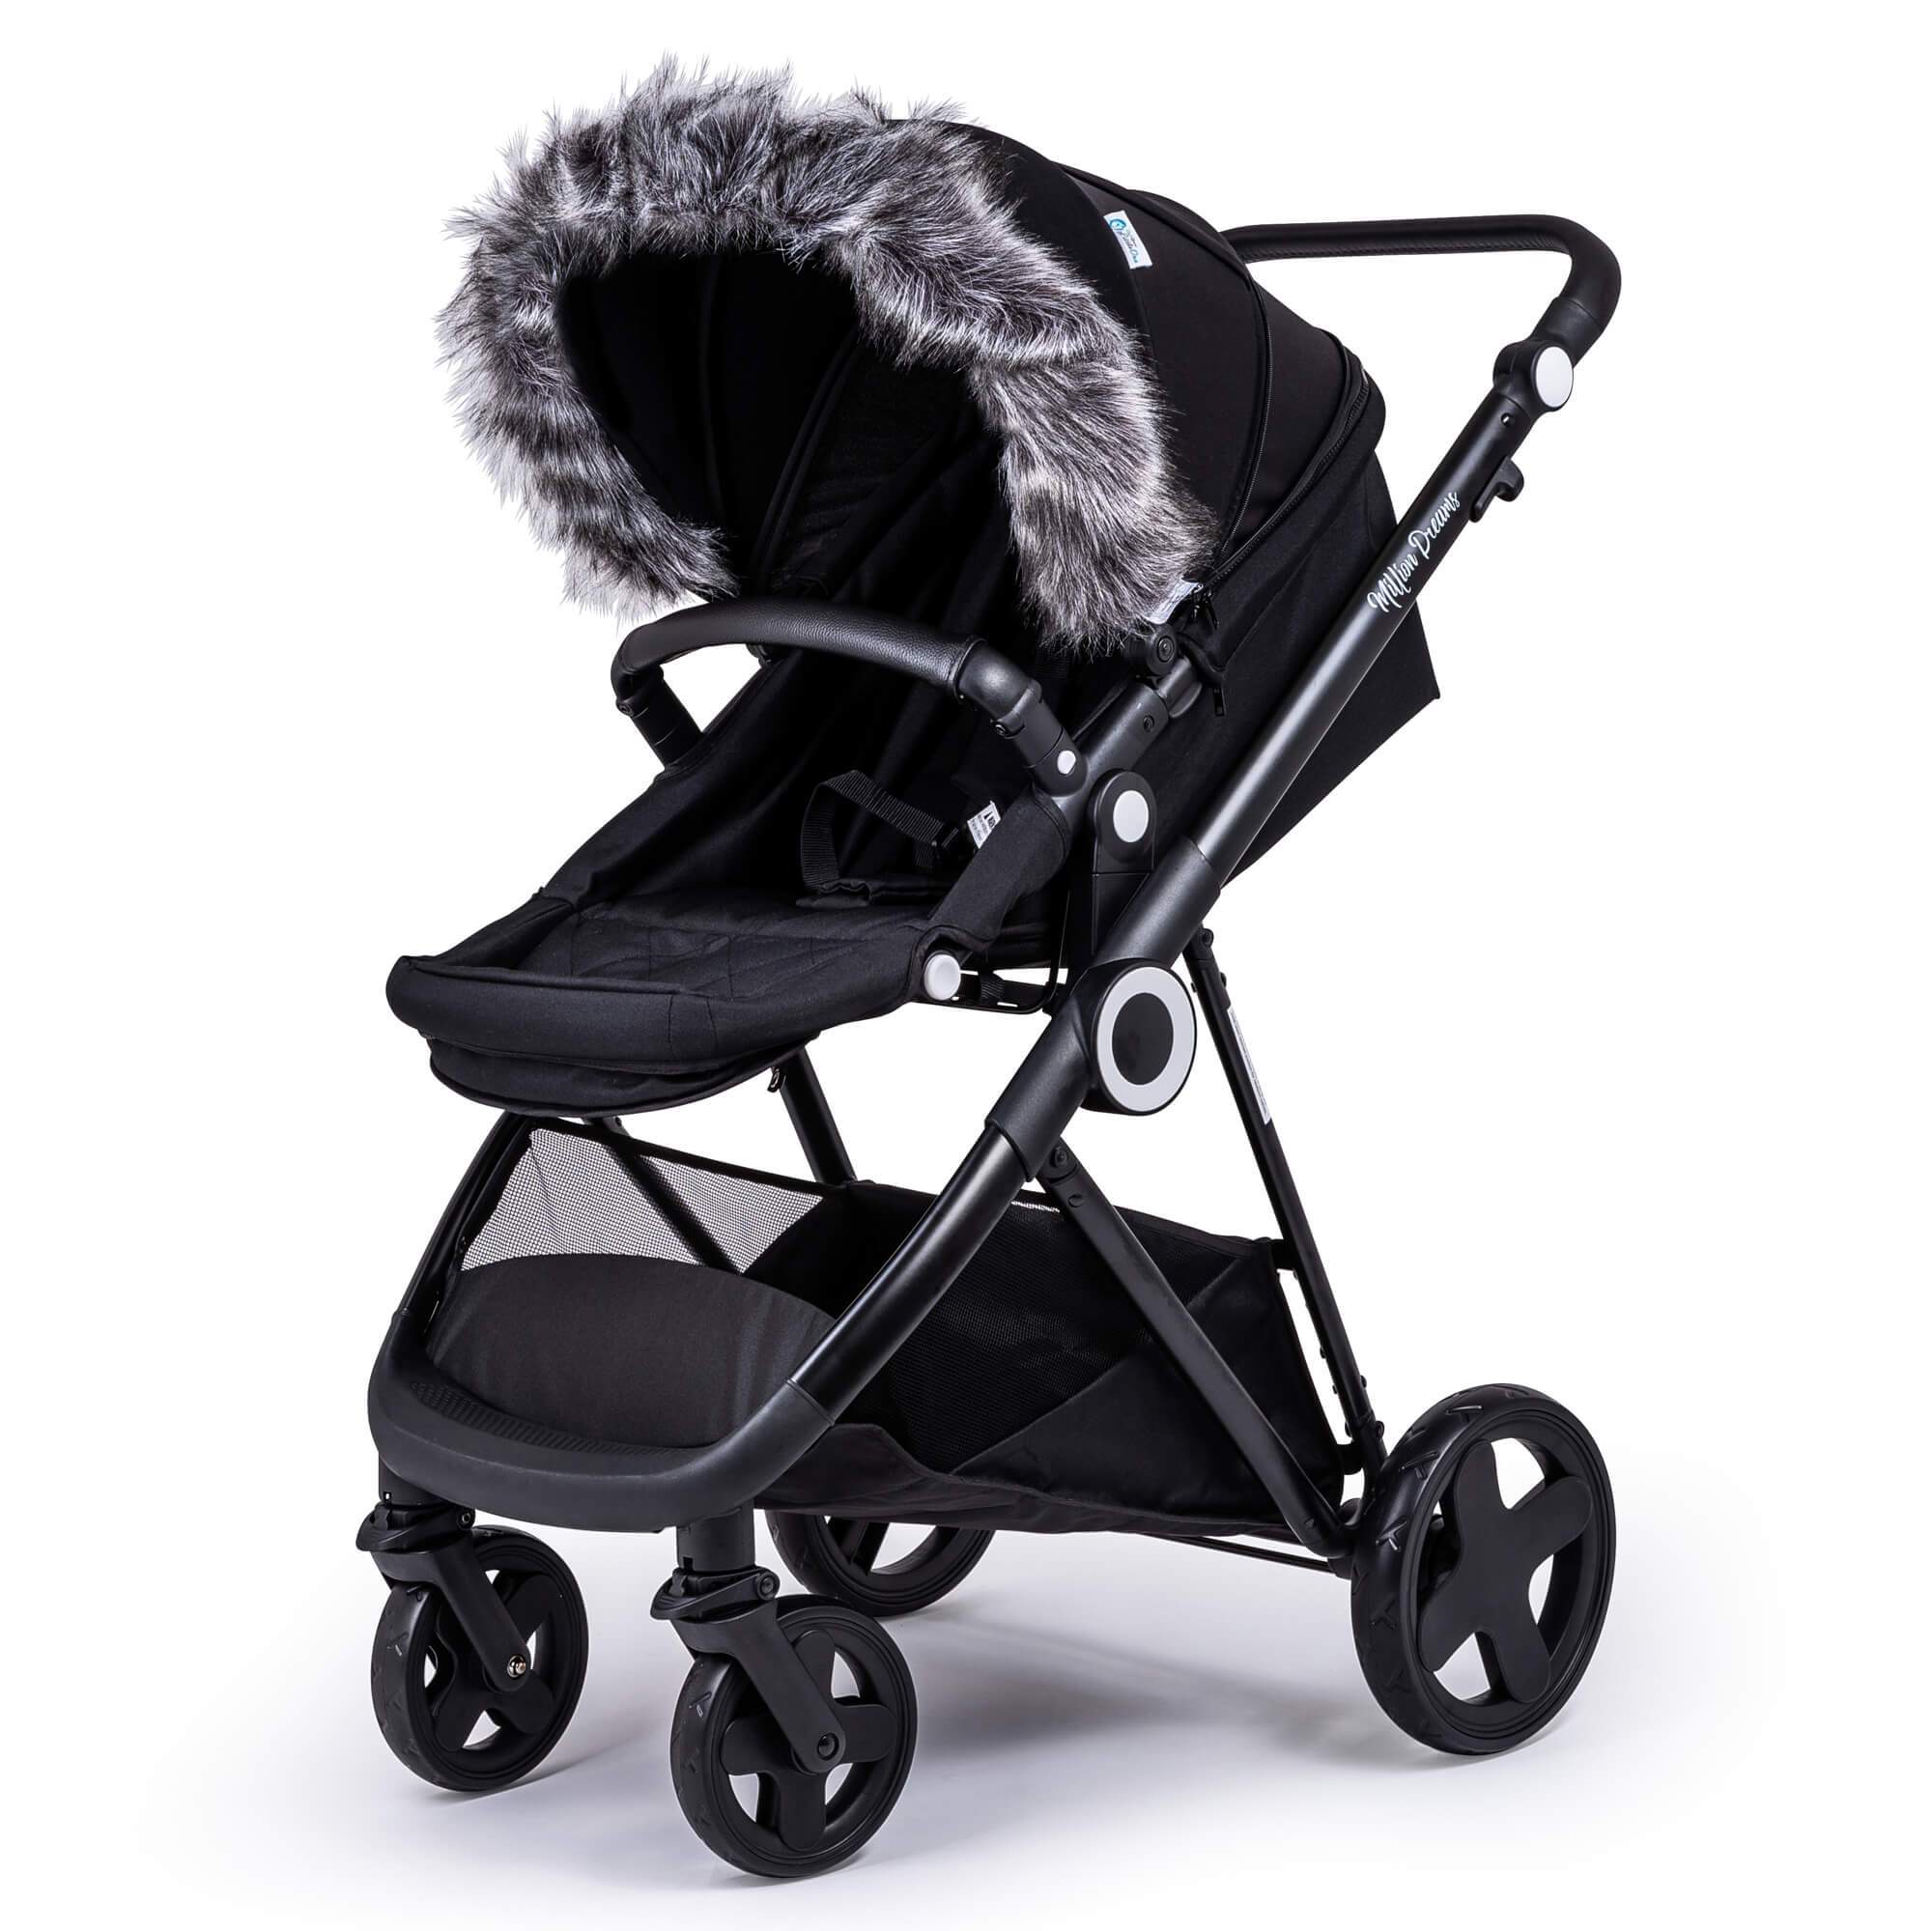 Pram Fur Hood Trim Attachment for Pushchair Compatible with Red Castle - Dark Grey / Fits All Models | For Your Little One